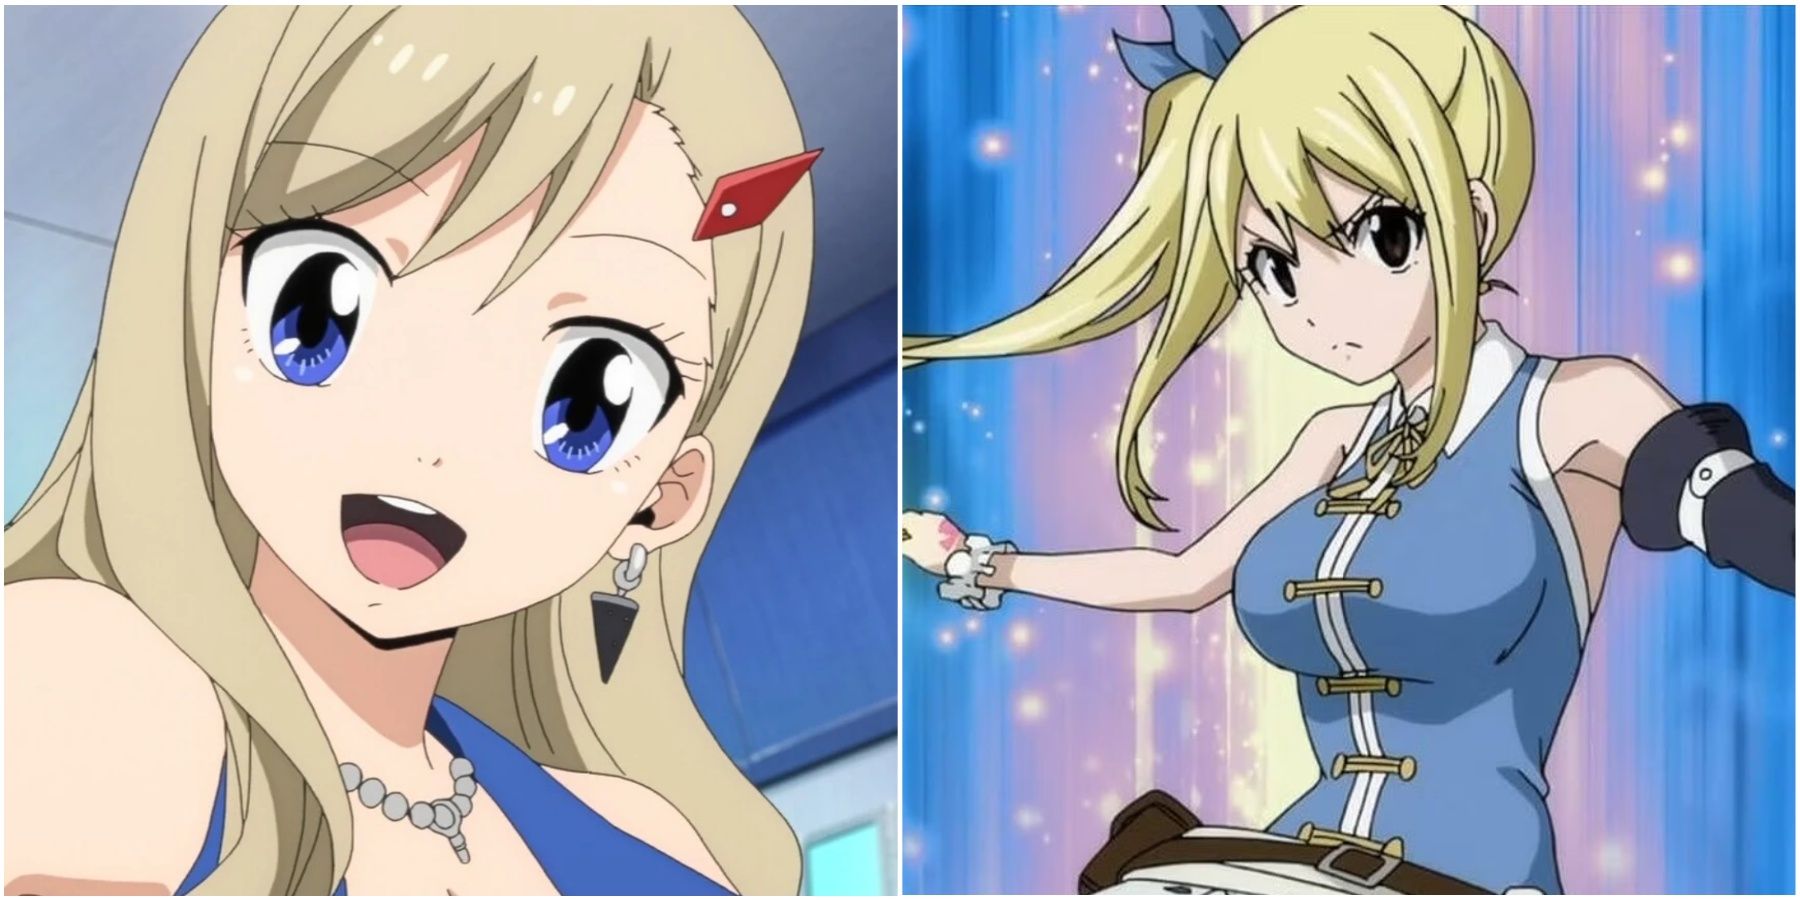 Lucy and Rebecca's Similarities